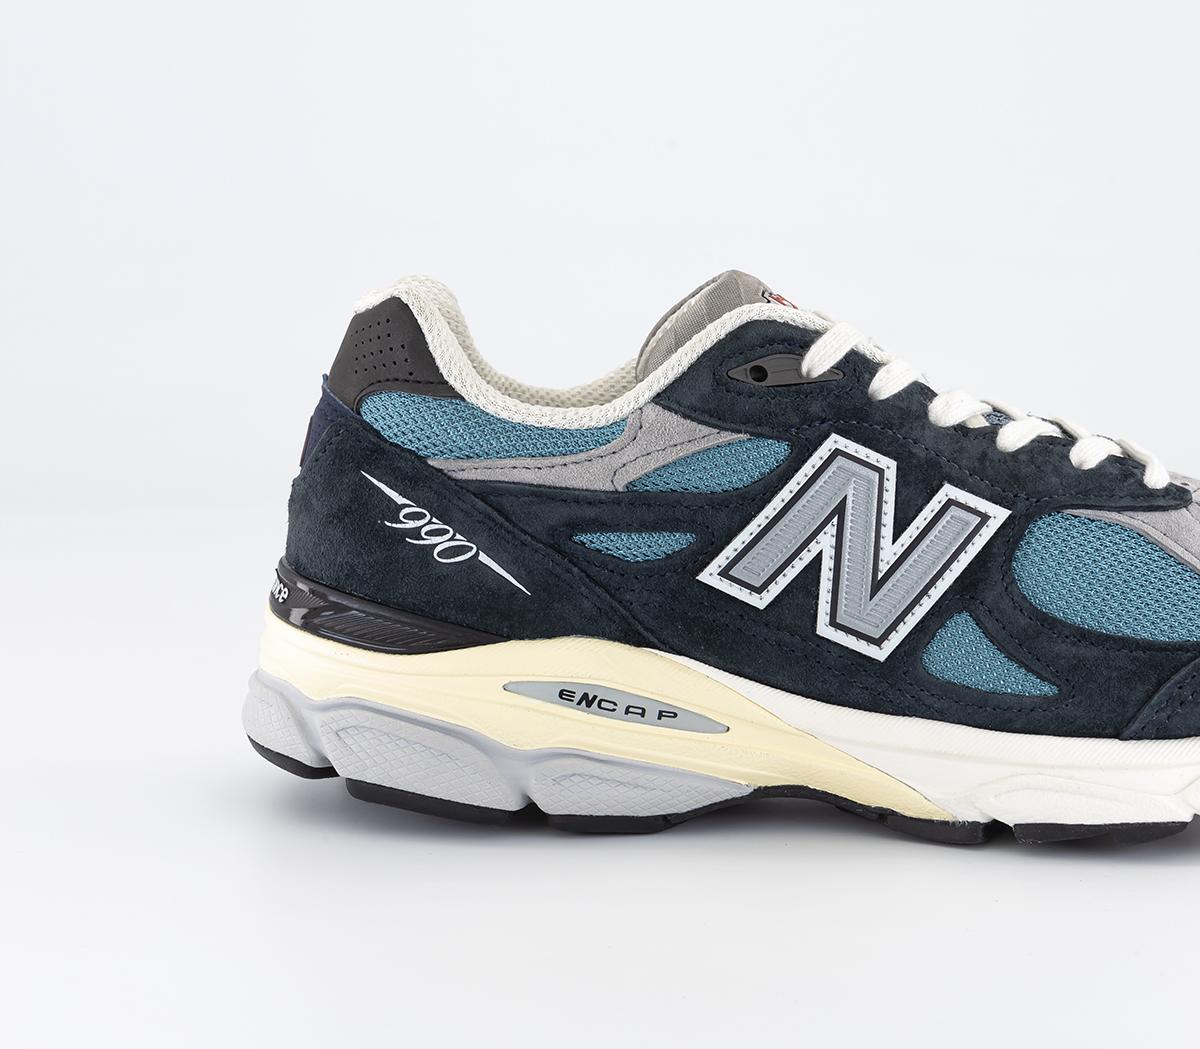 New Balance 990v3 Trainers Navy - Men's Classic Trainers